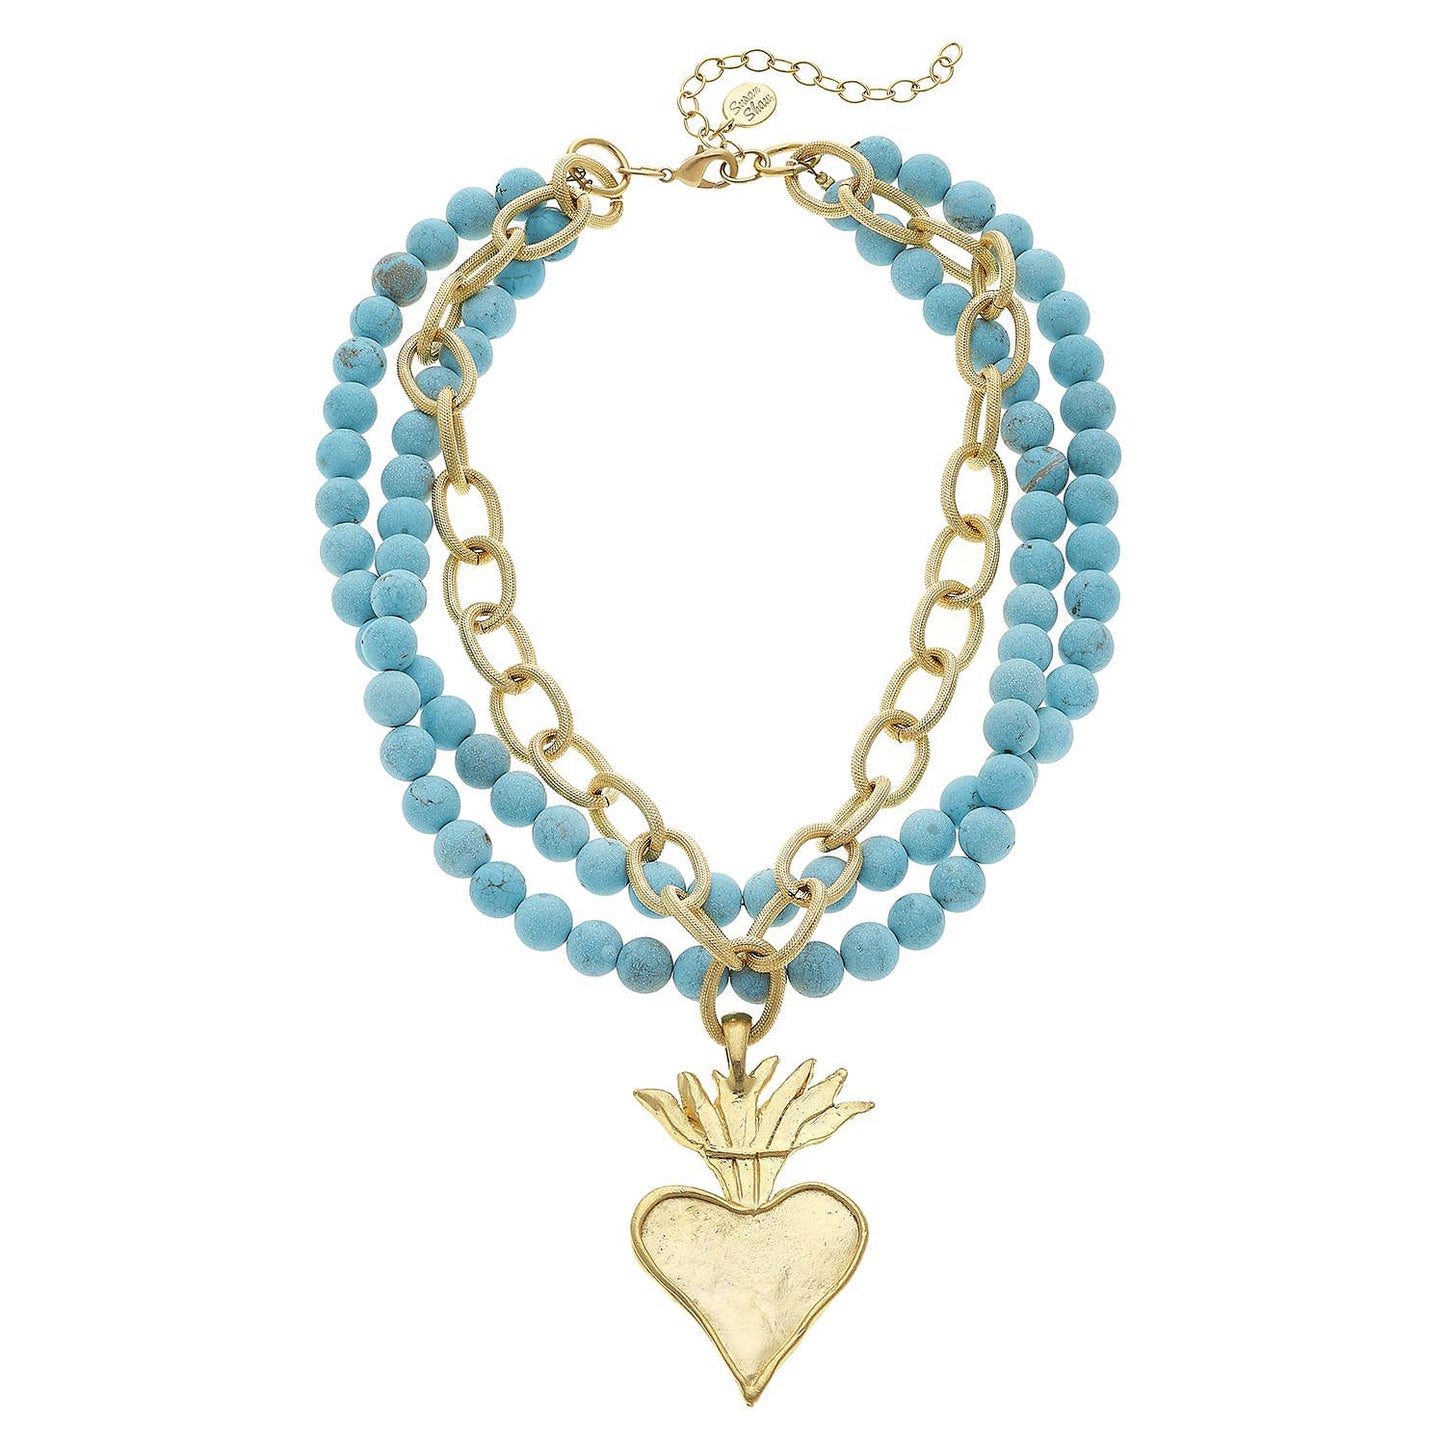 Gold Flaming Heart on 3 Row Genuine Matte Turquoise Necklace